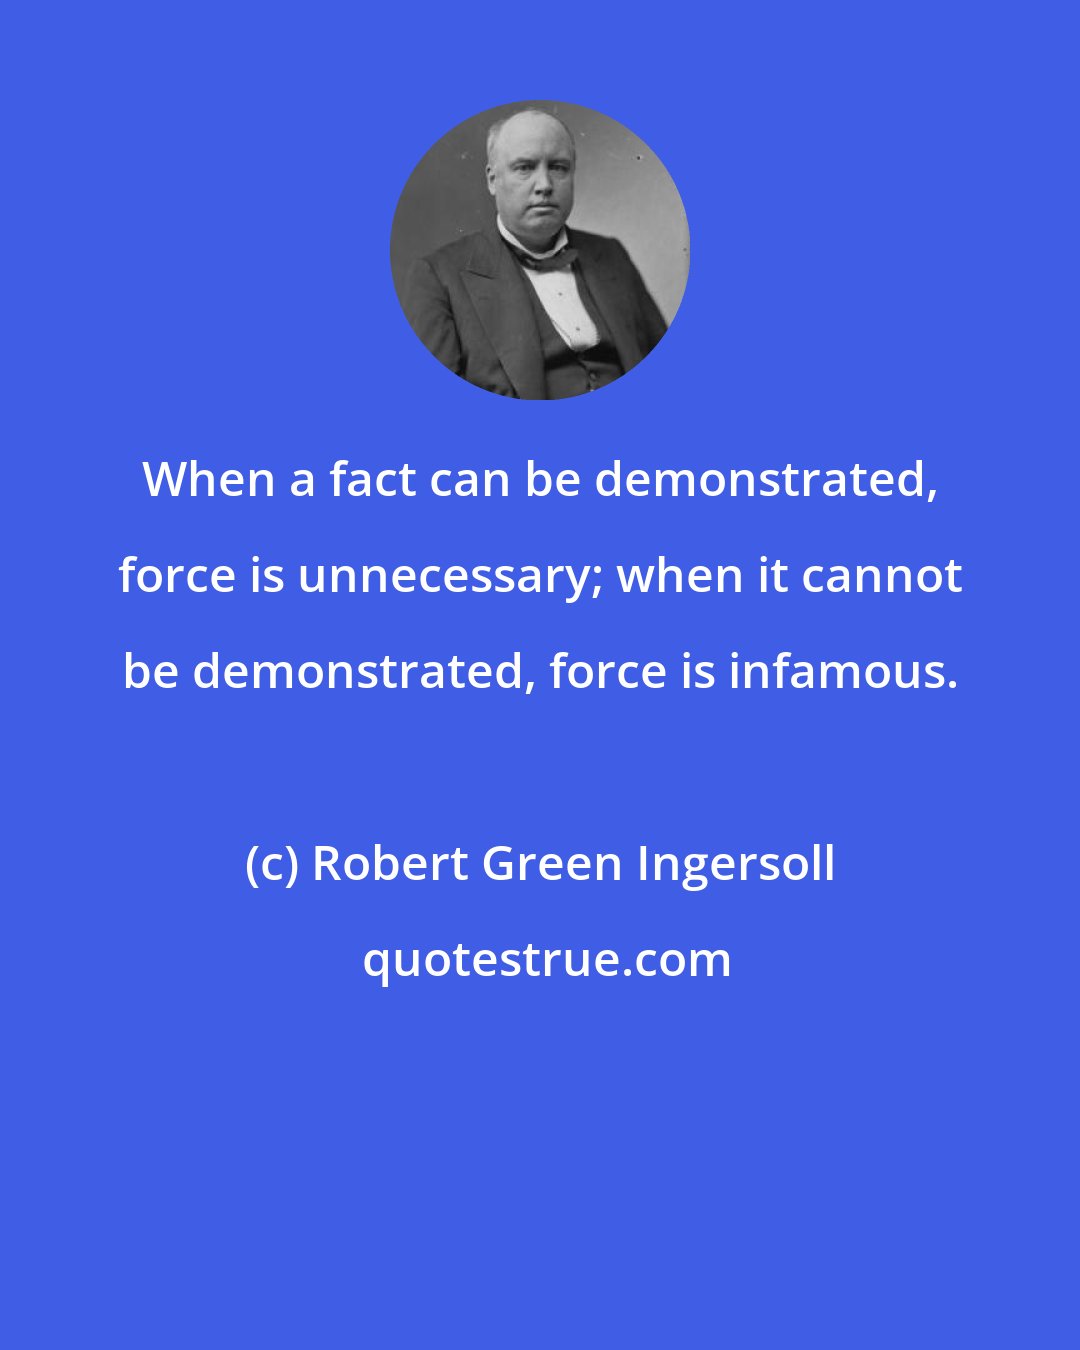 Robert Green Ingersoll: When a fact can be demonstrated, force is unnecessary; when it cannot be demonstrated, force is infamous.